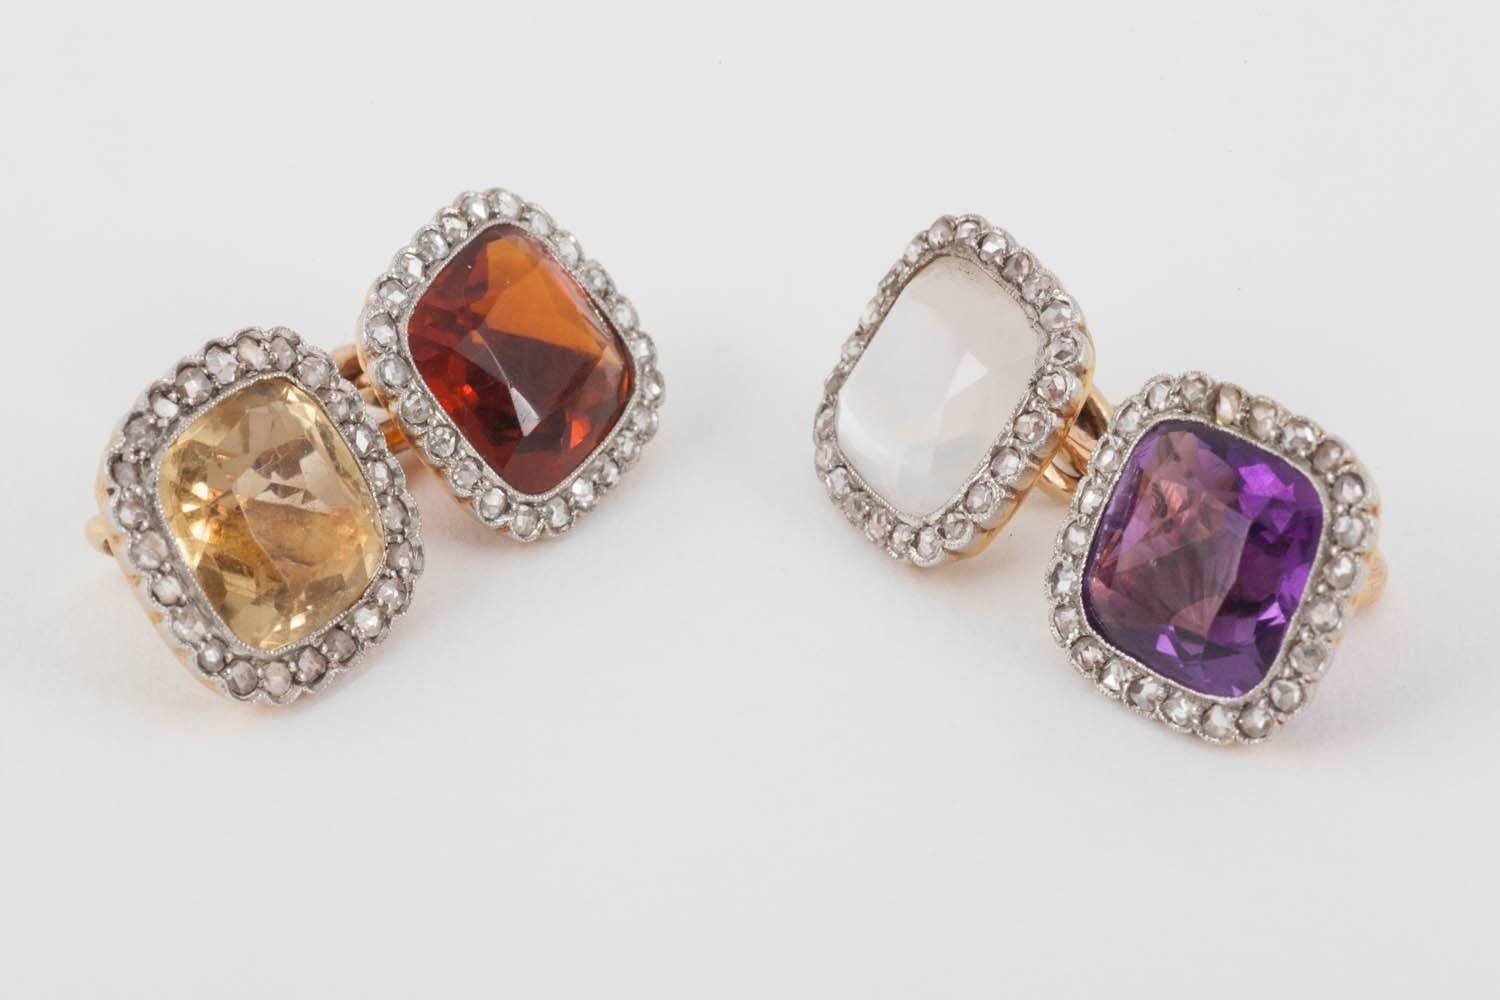 Pair of rose cut diamond cluster cufflinks,with a frosted Crystal ,Amethyst,Citrine,and a Quartz topaz Centre.The figure of eight ,link connection opens ,in order to change the colours.Very bright quality stones.Probably  Austrian,set in